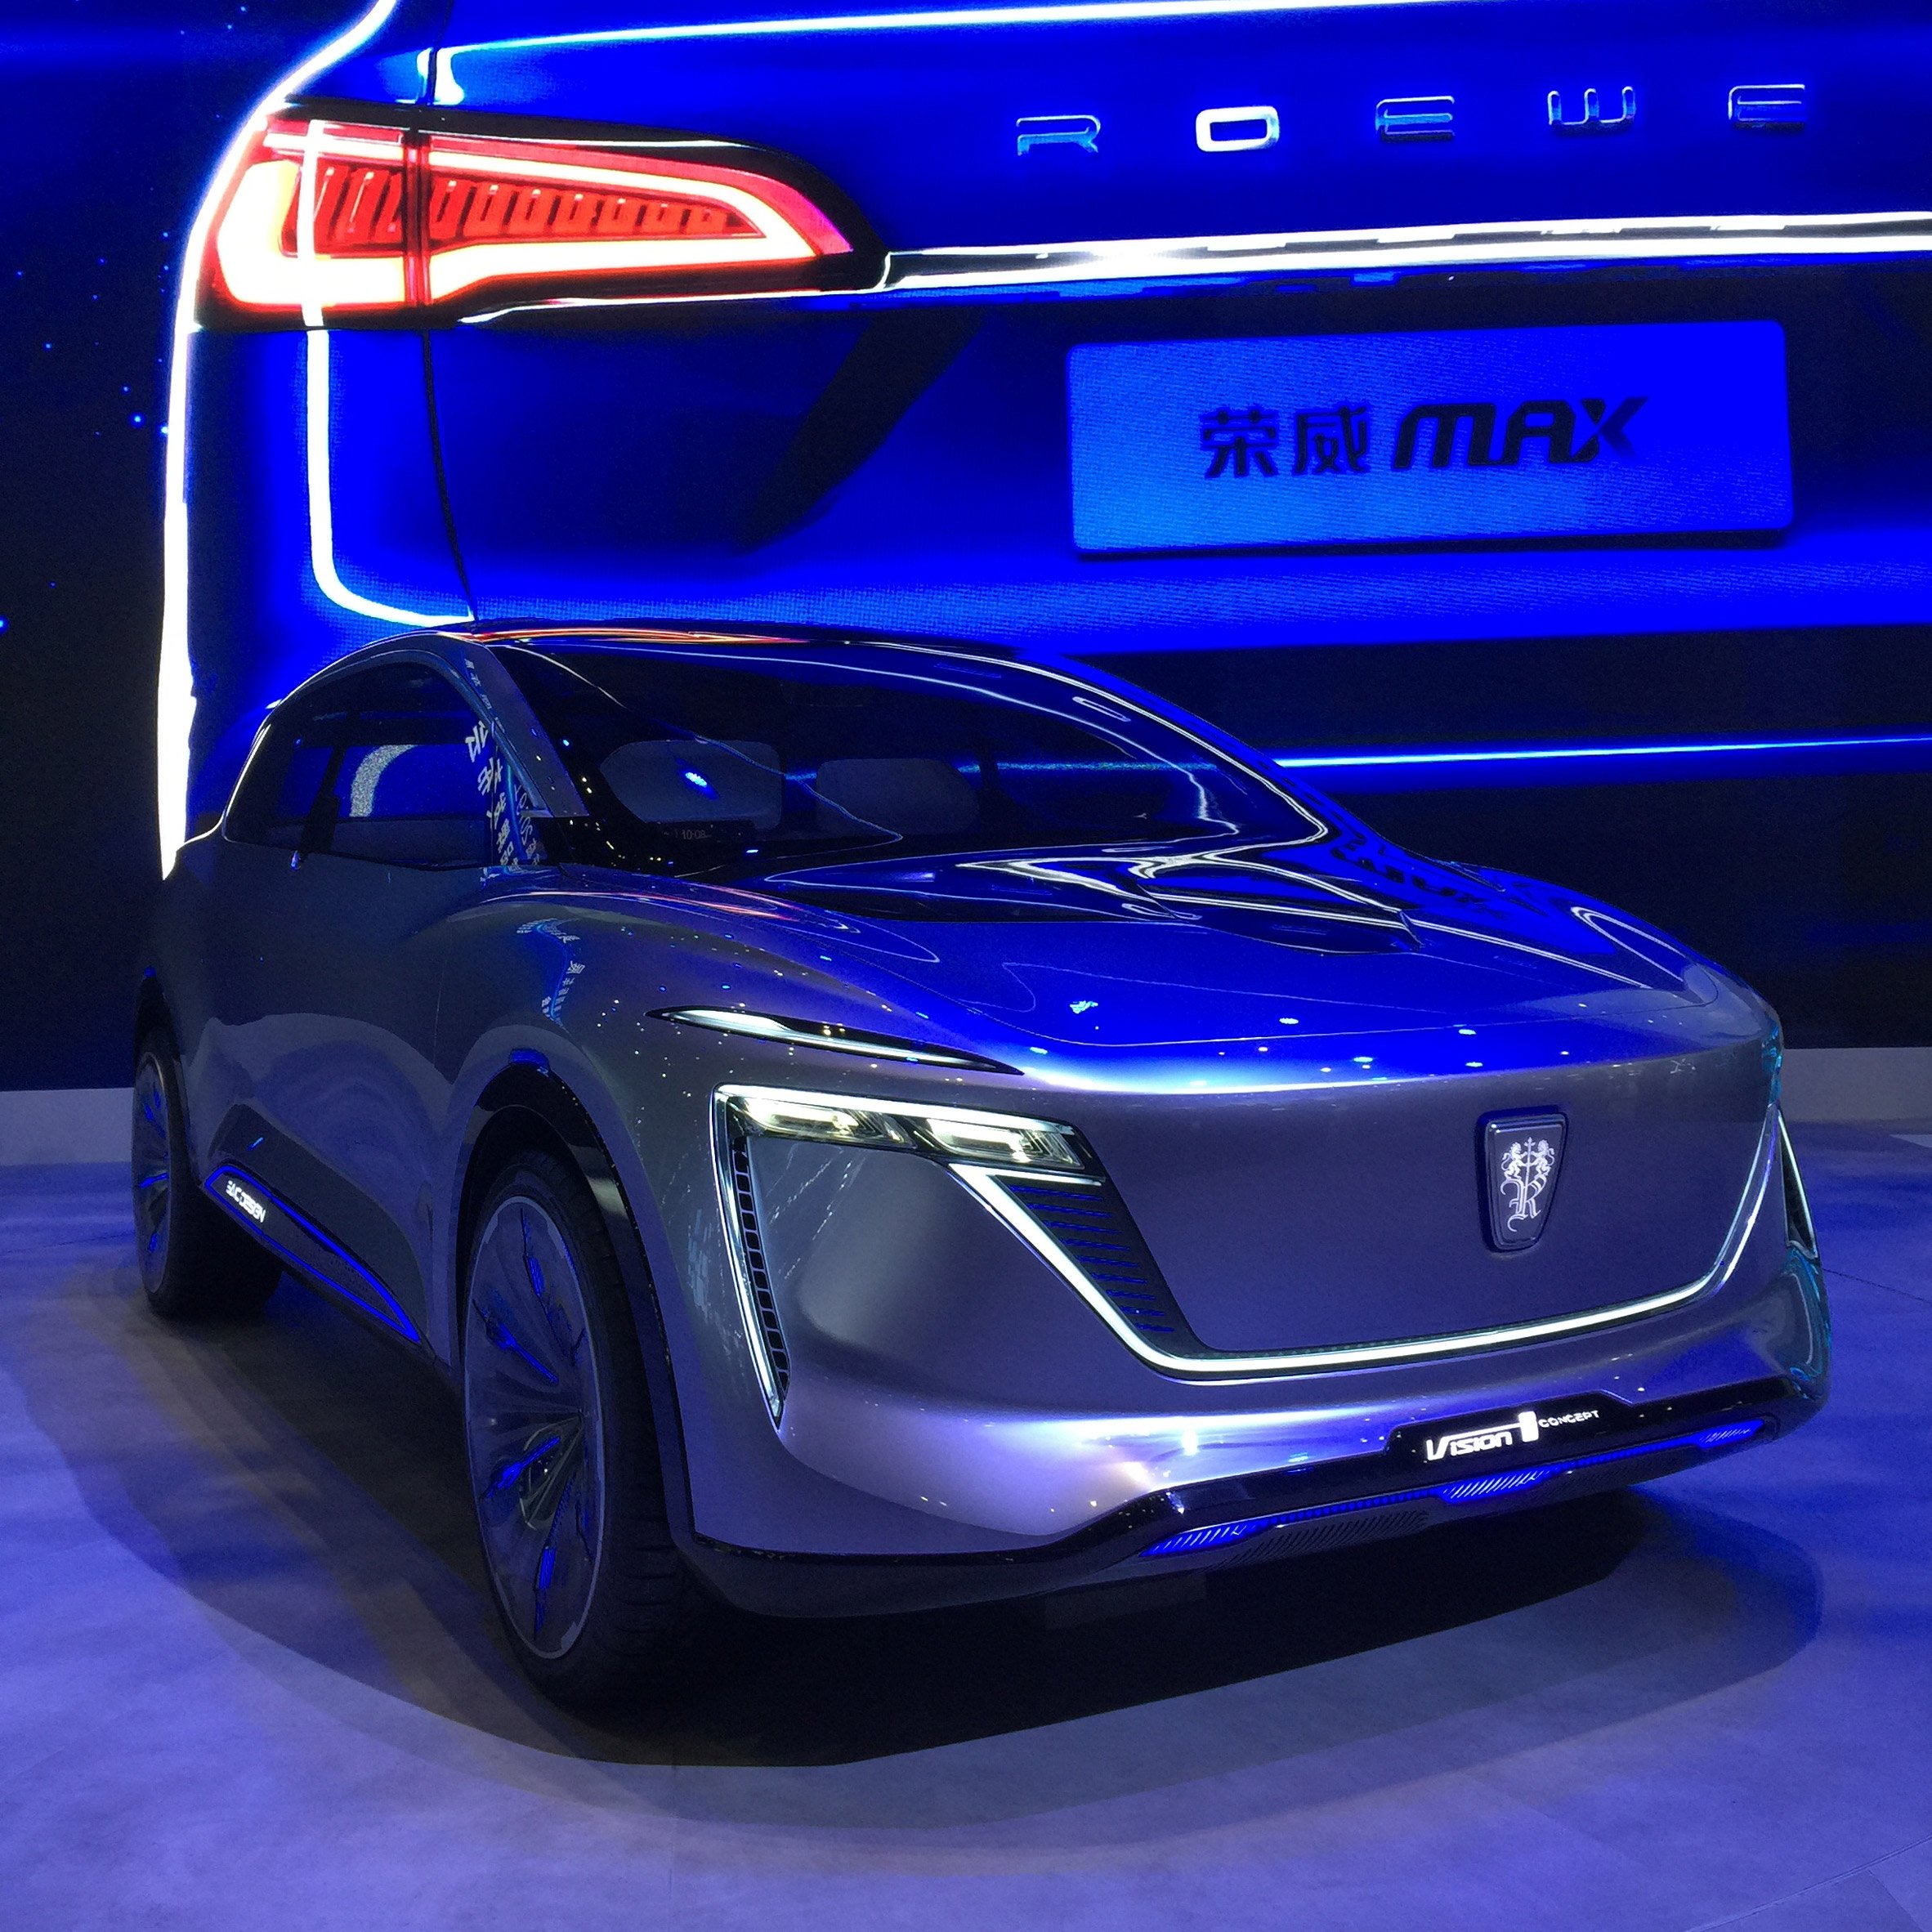 10 electric cars unveiled by Chinese car companies at Auto Shanghai 2019 - Dr Wong - Emporium of ...